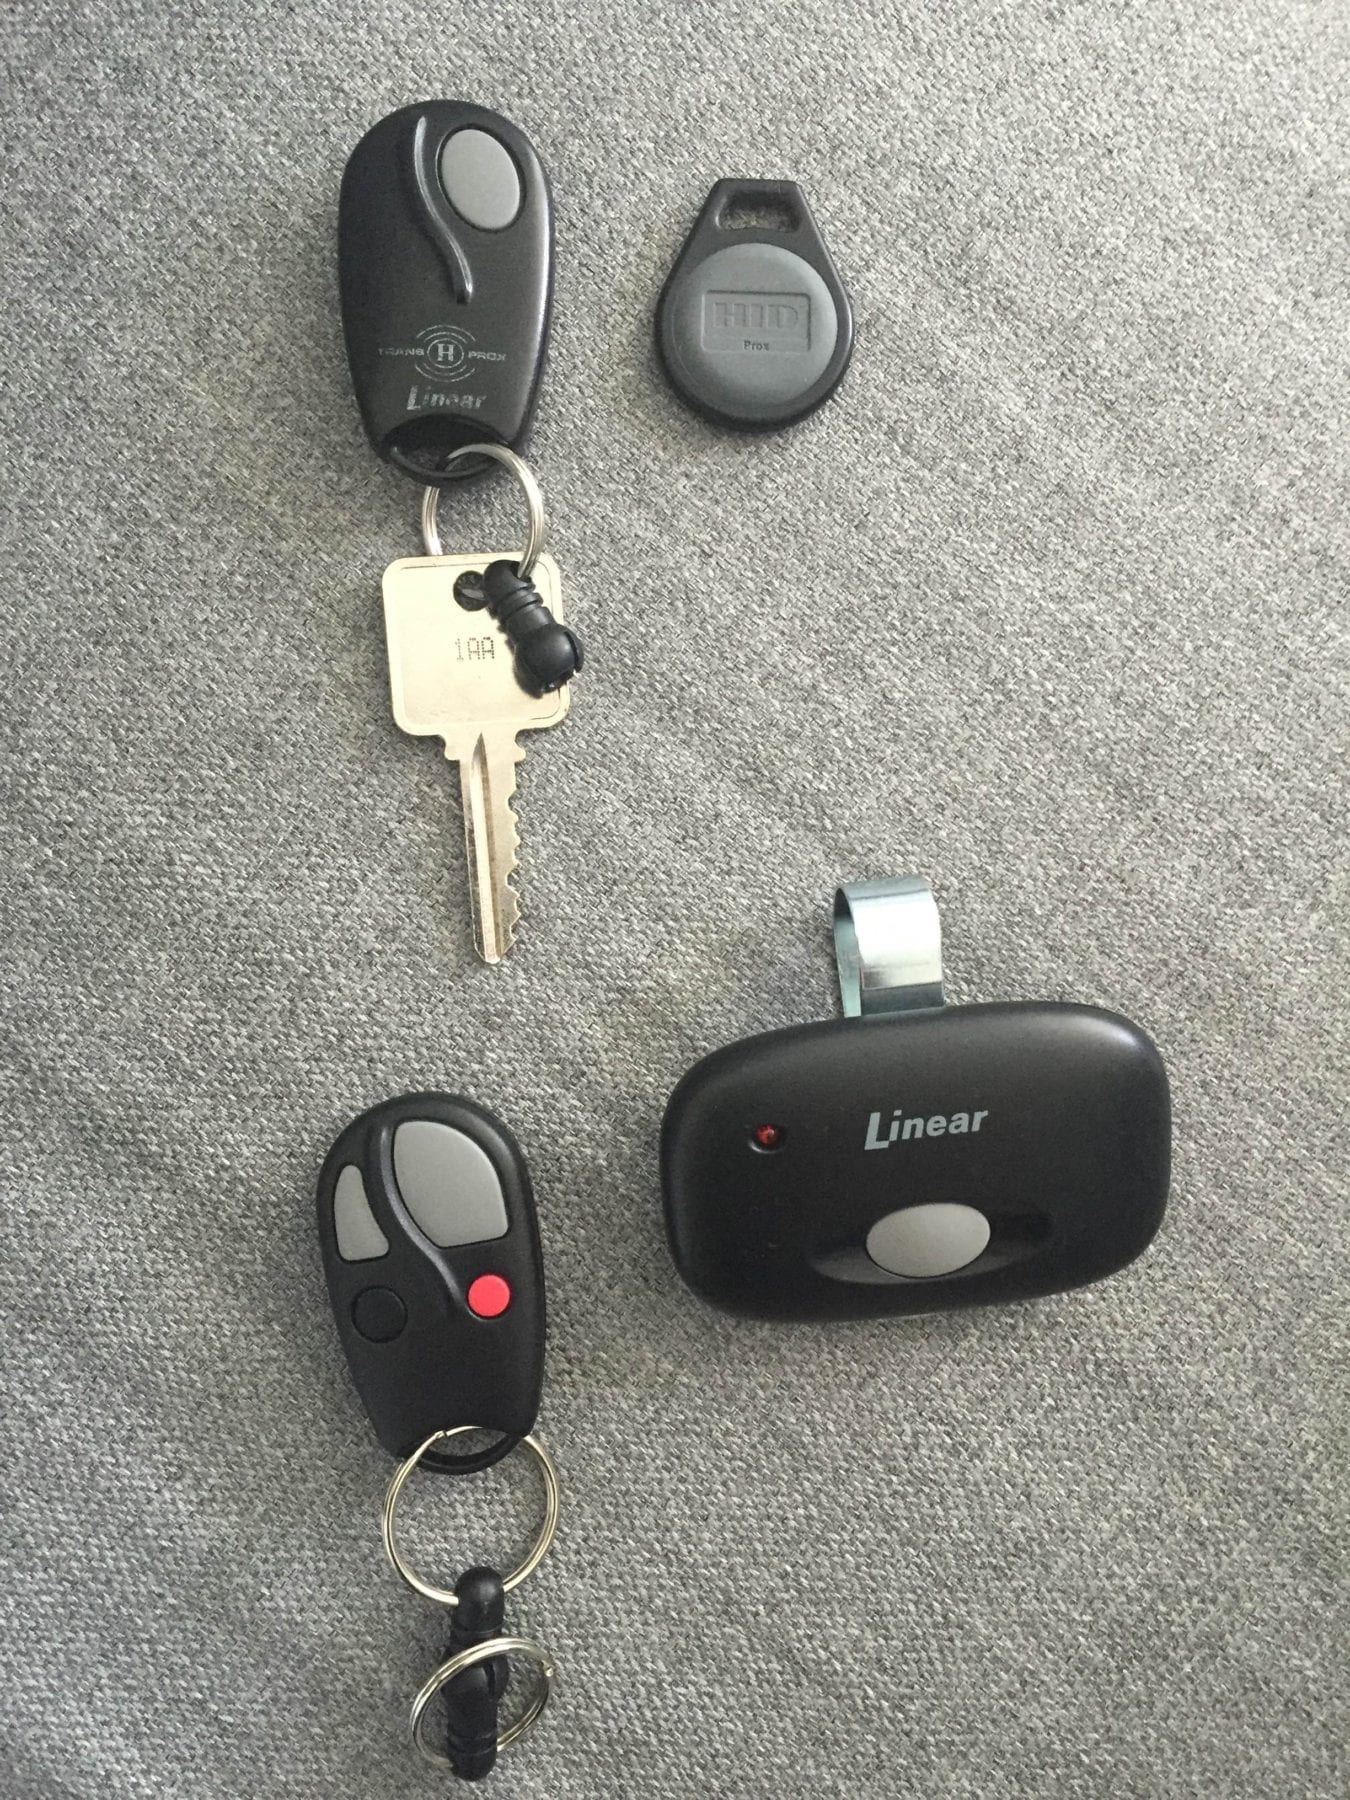 Linear, HID Key Fobs and Garage Remotes